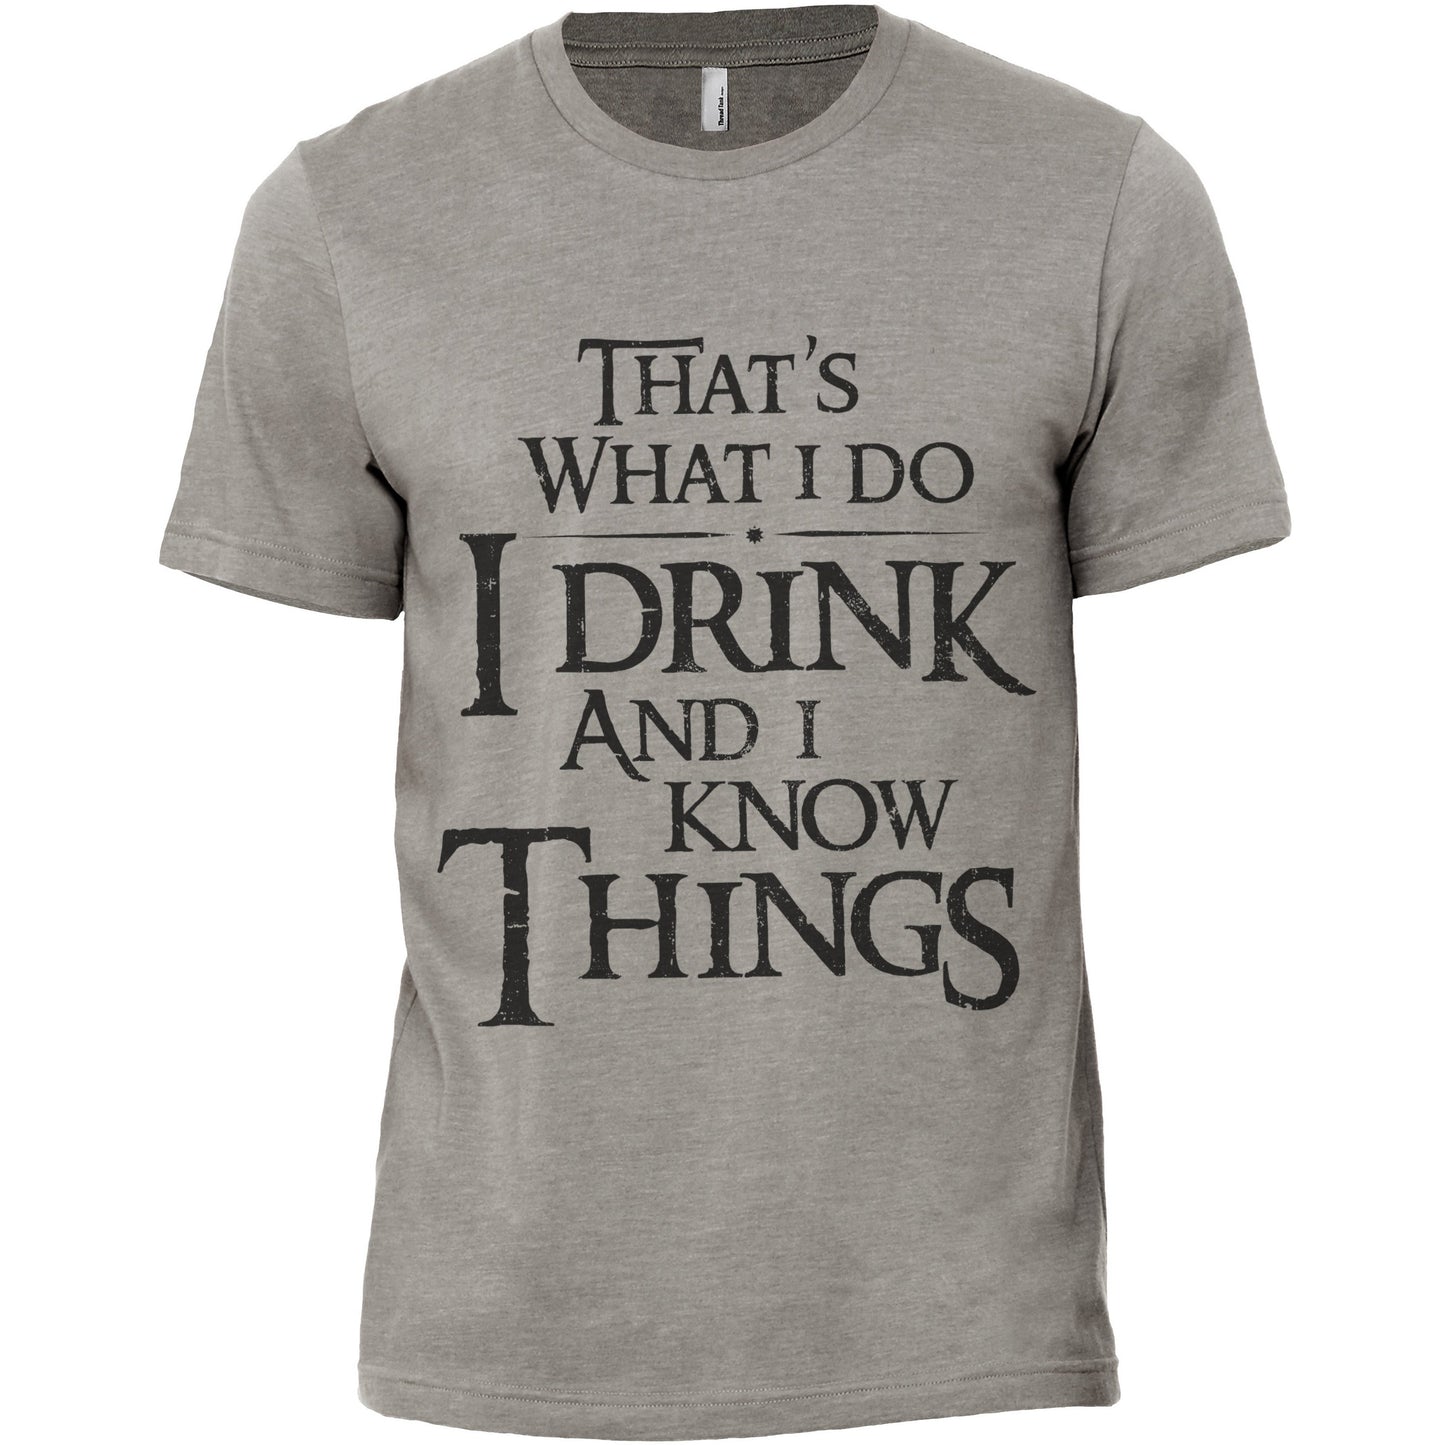 Thats What I Do I Drink And I Know Things Military Grey Printed Graphic Men's Crew T-Shirt Tee